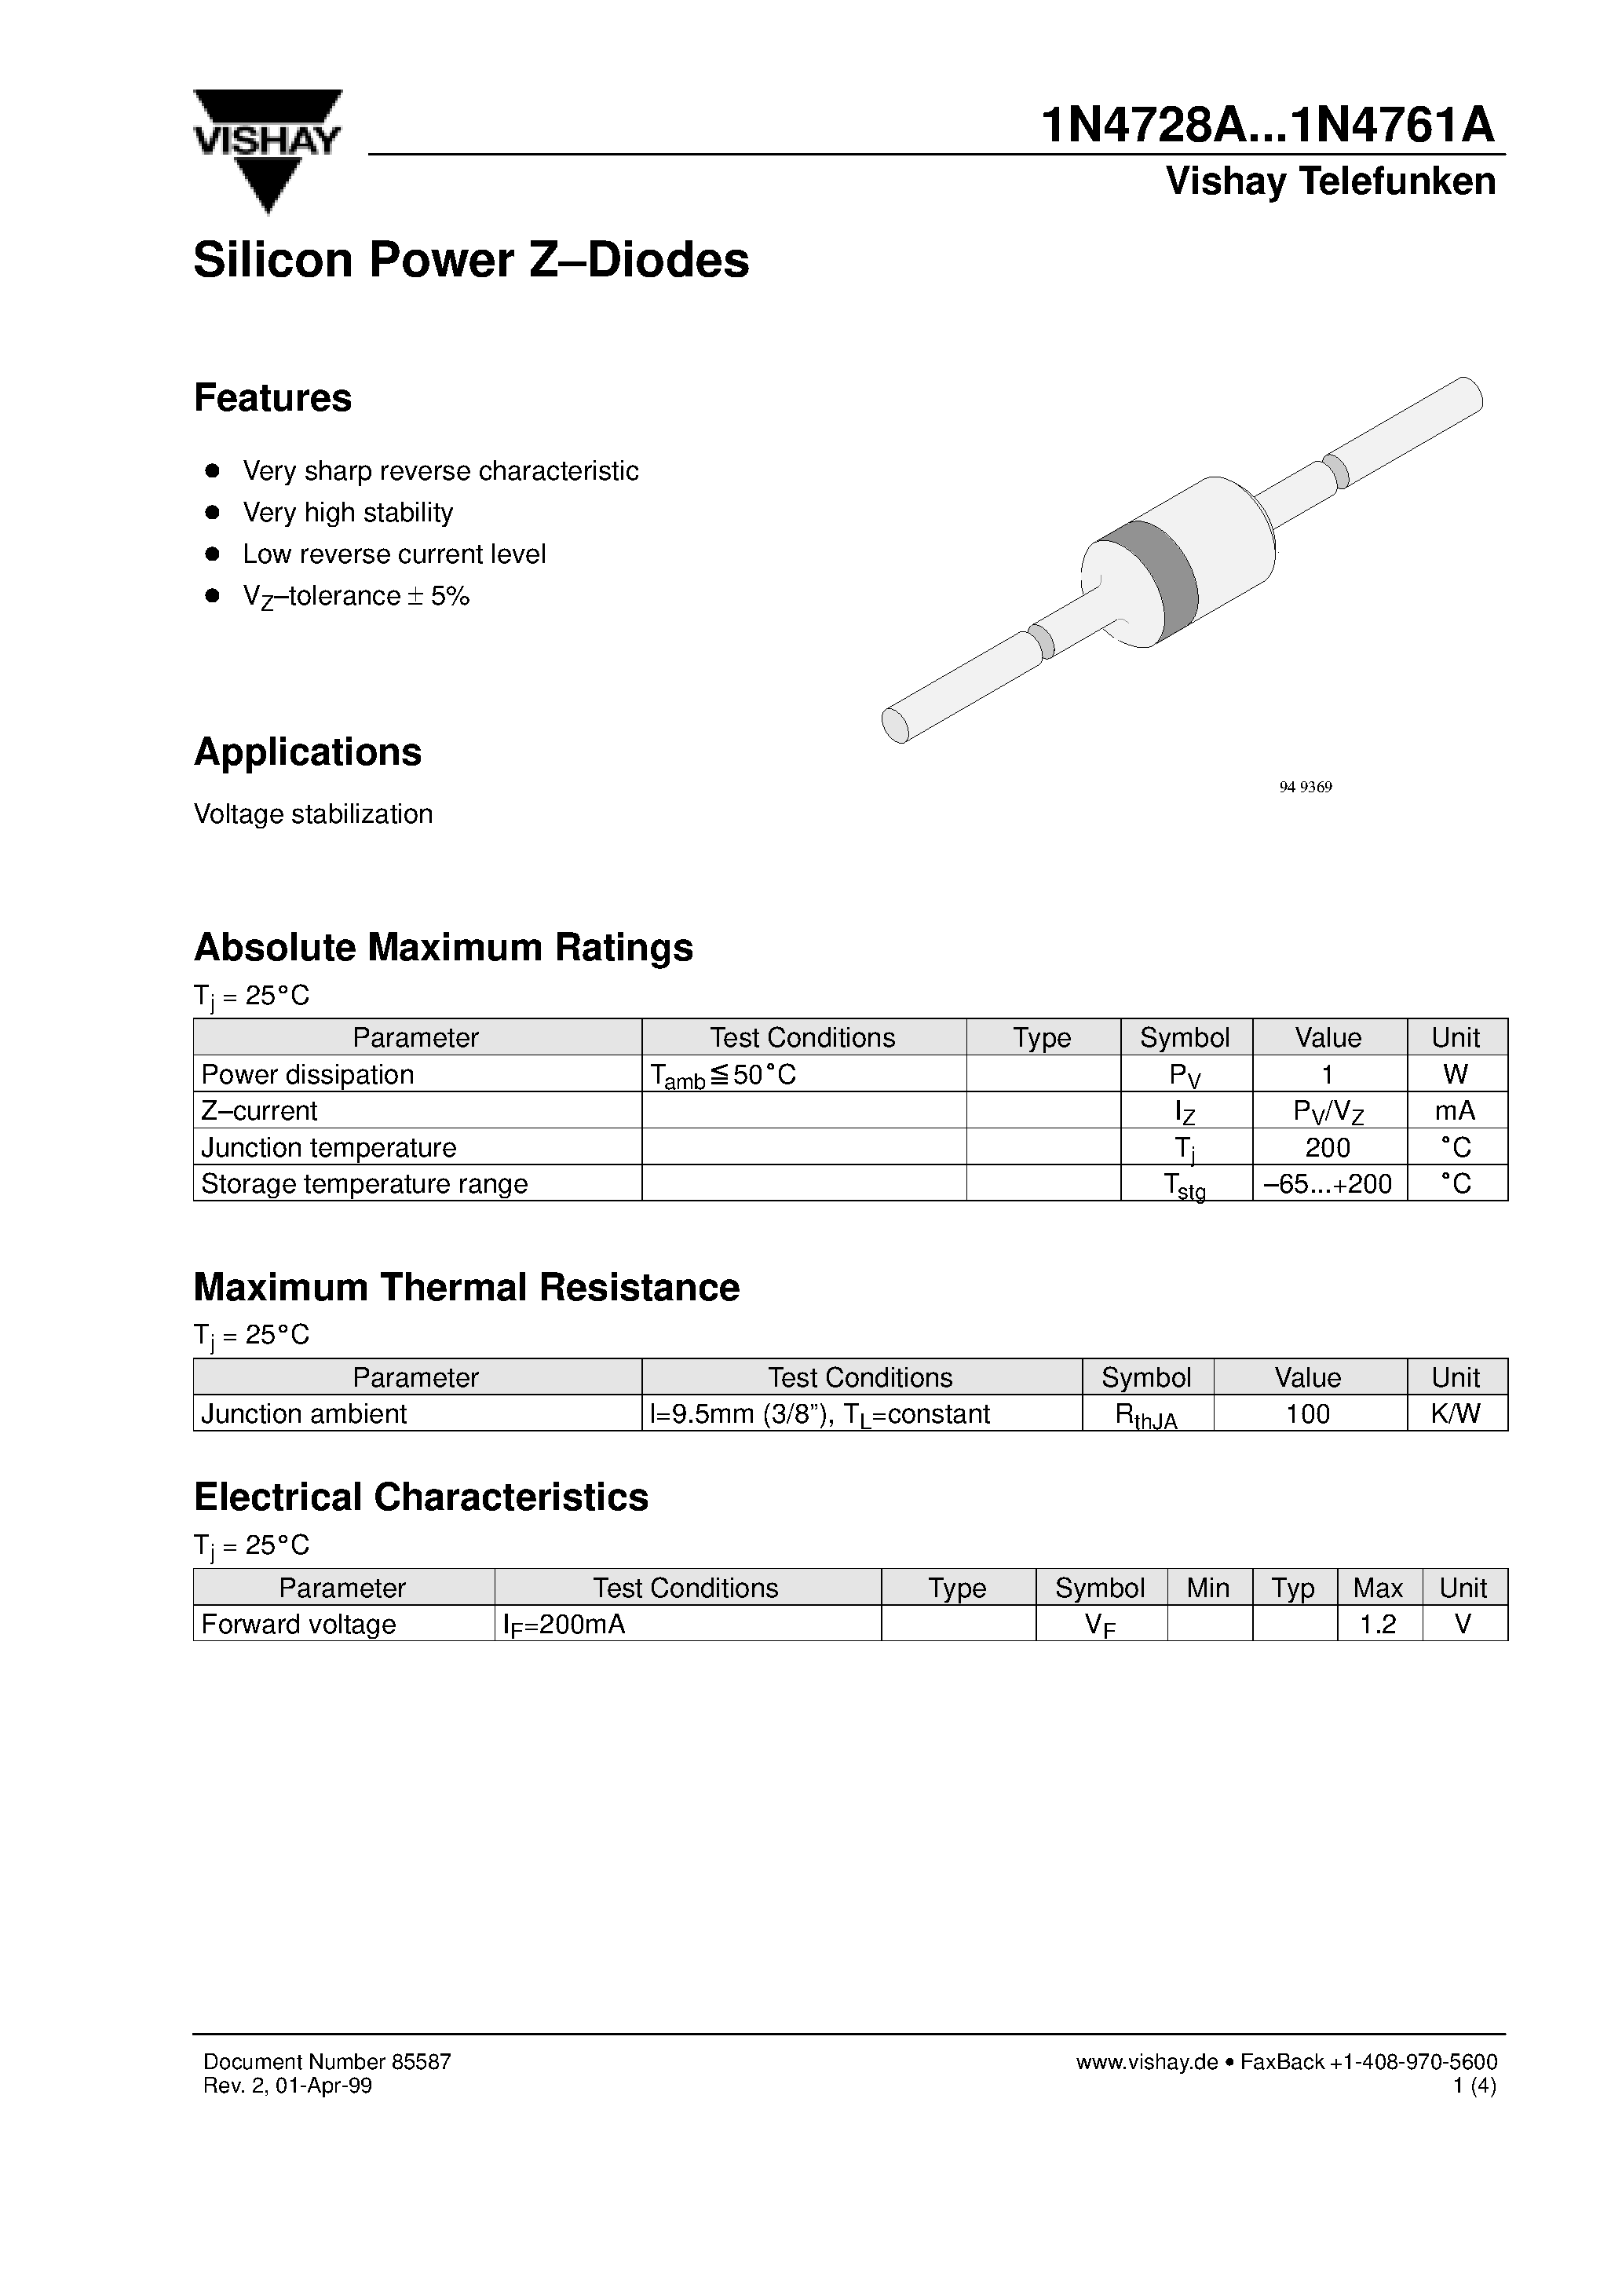 Даташит 1N4741A - Silicon Power Z-Diodes страница 1